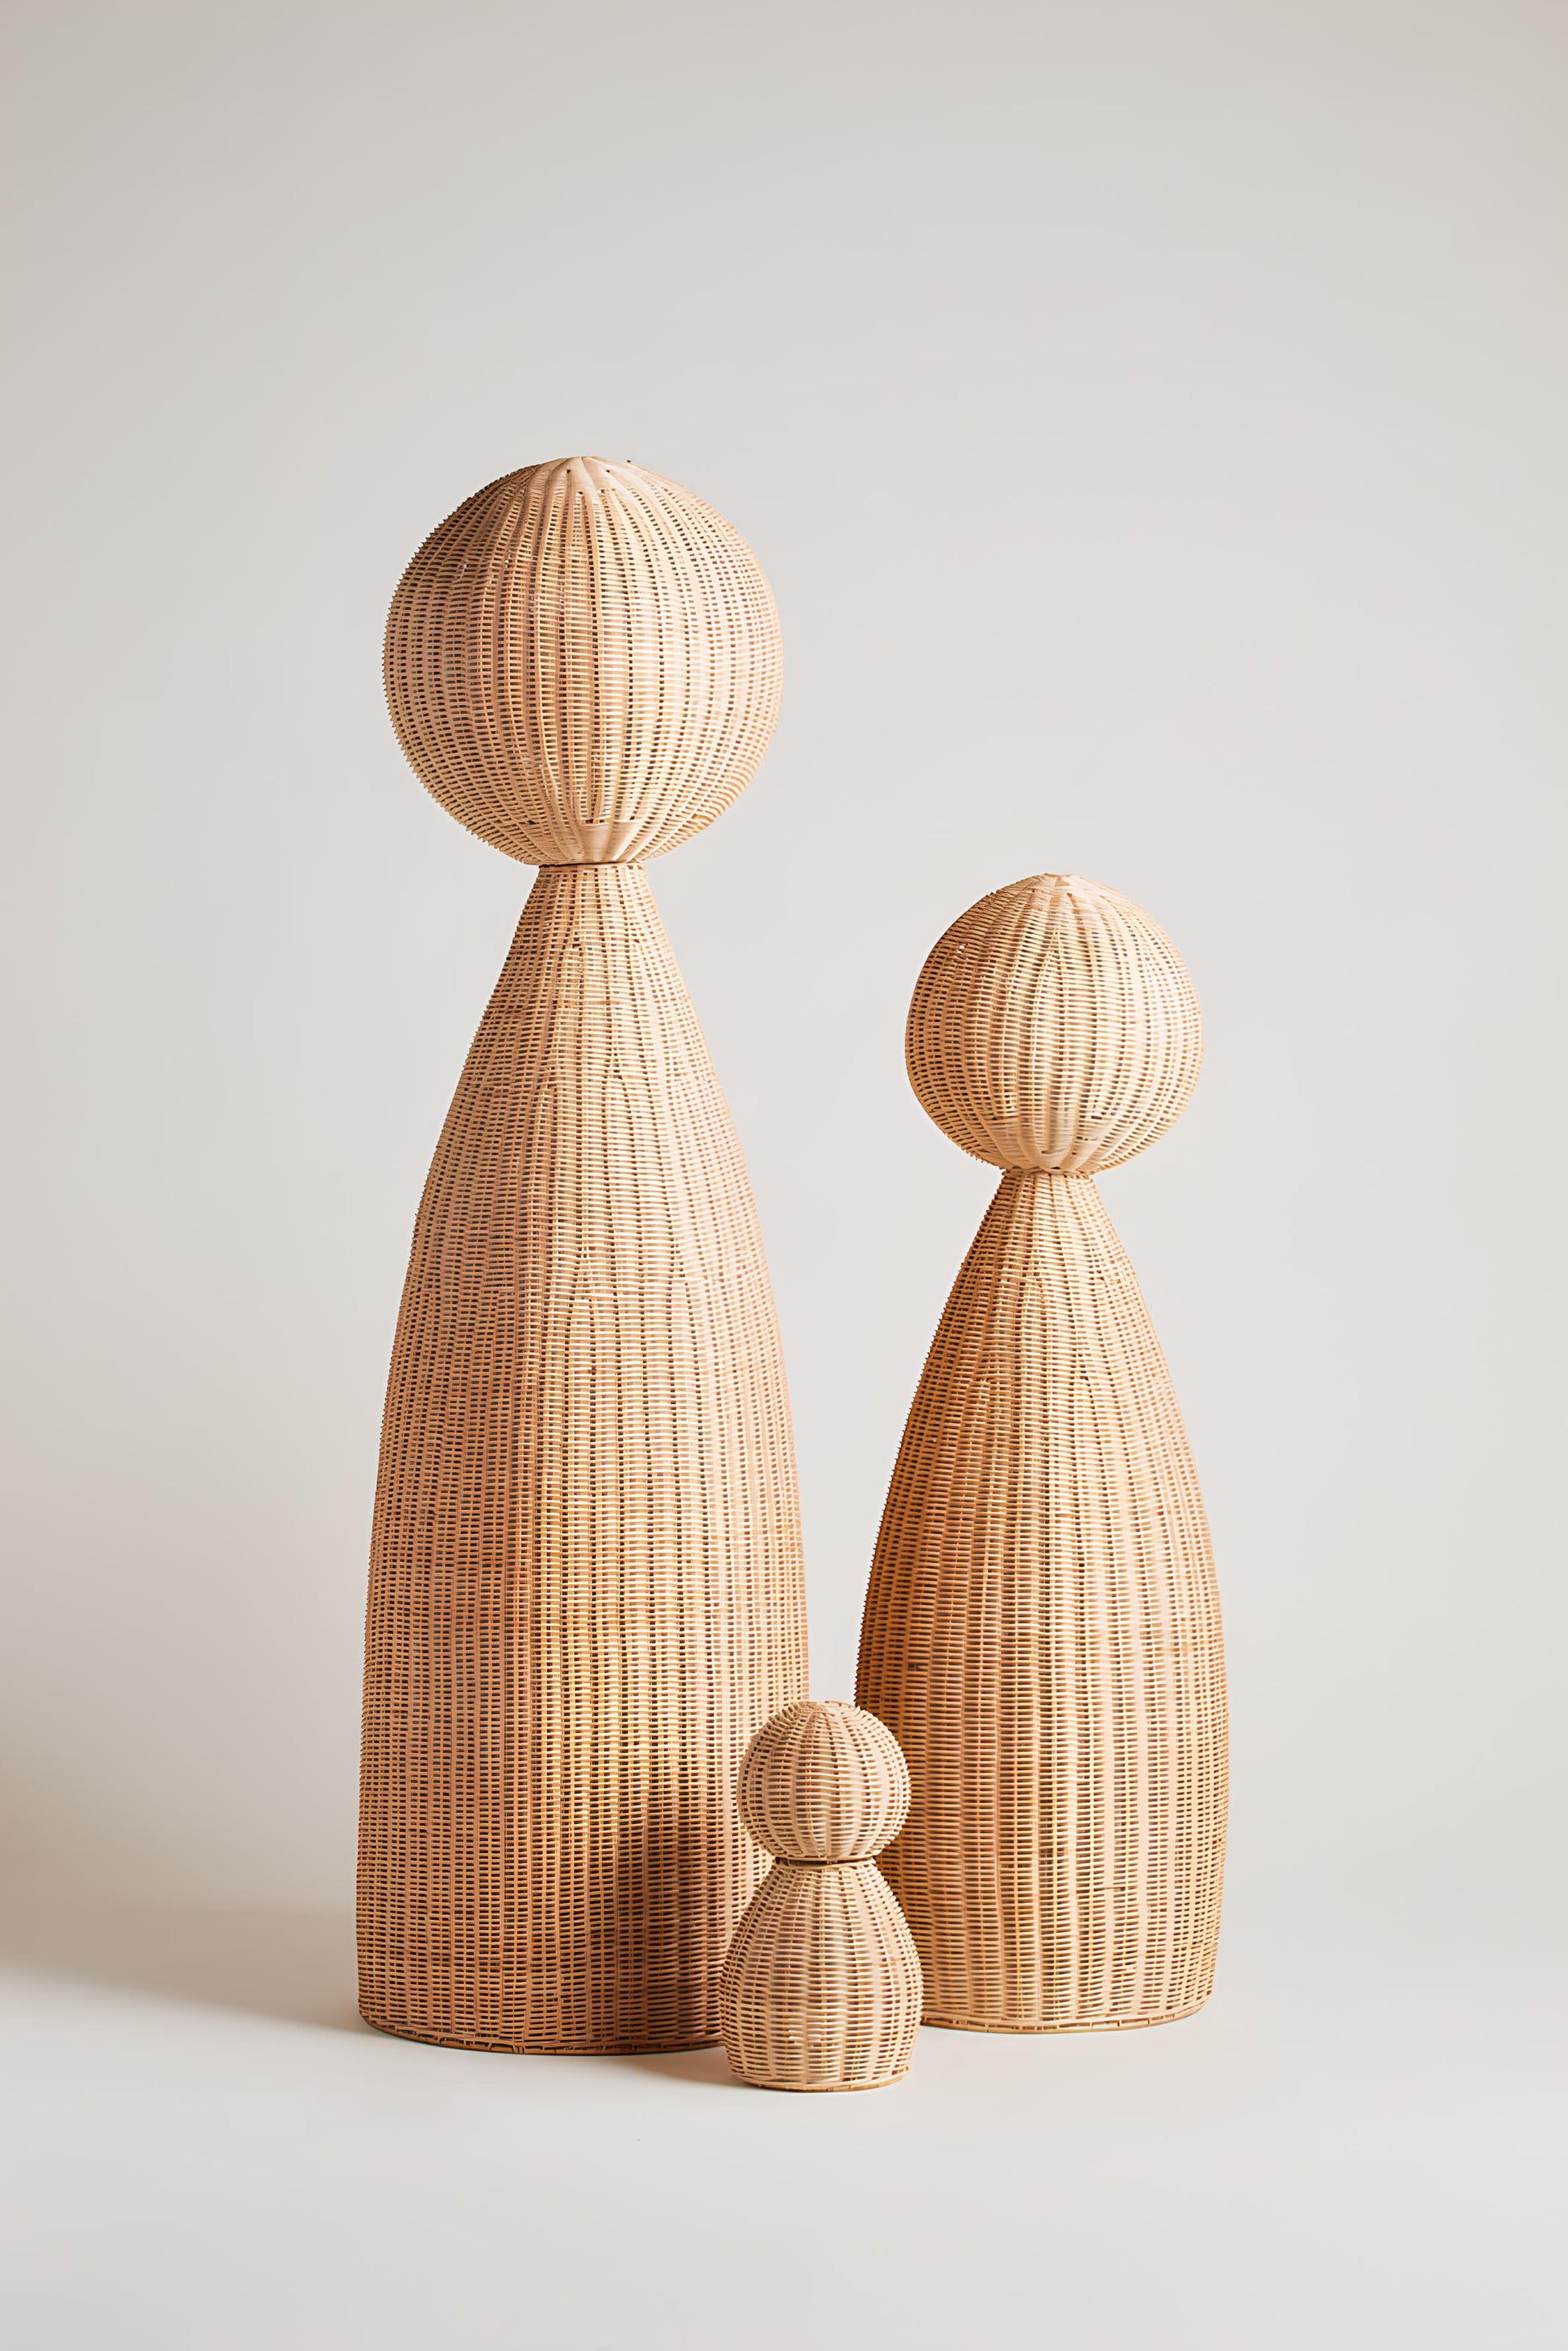 Rattan Table lamp for Living room | Bamboo Bedside table lamp | Cane Table lamp -Dasya - Akway